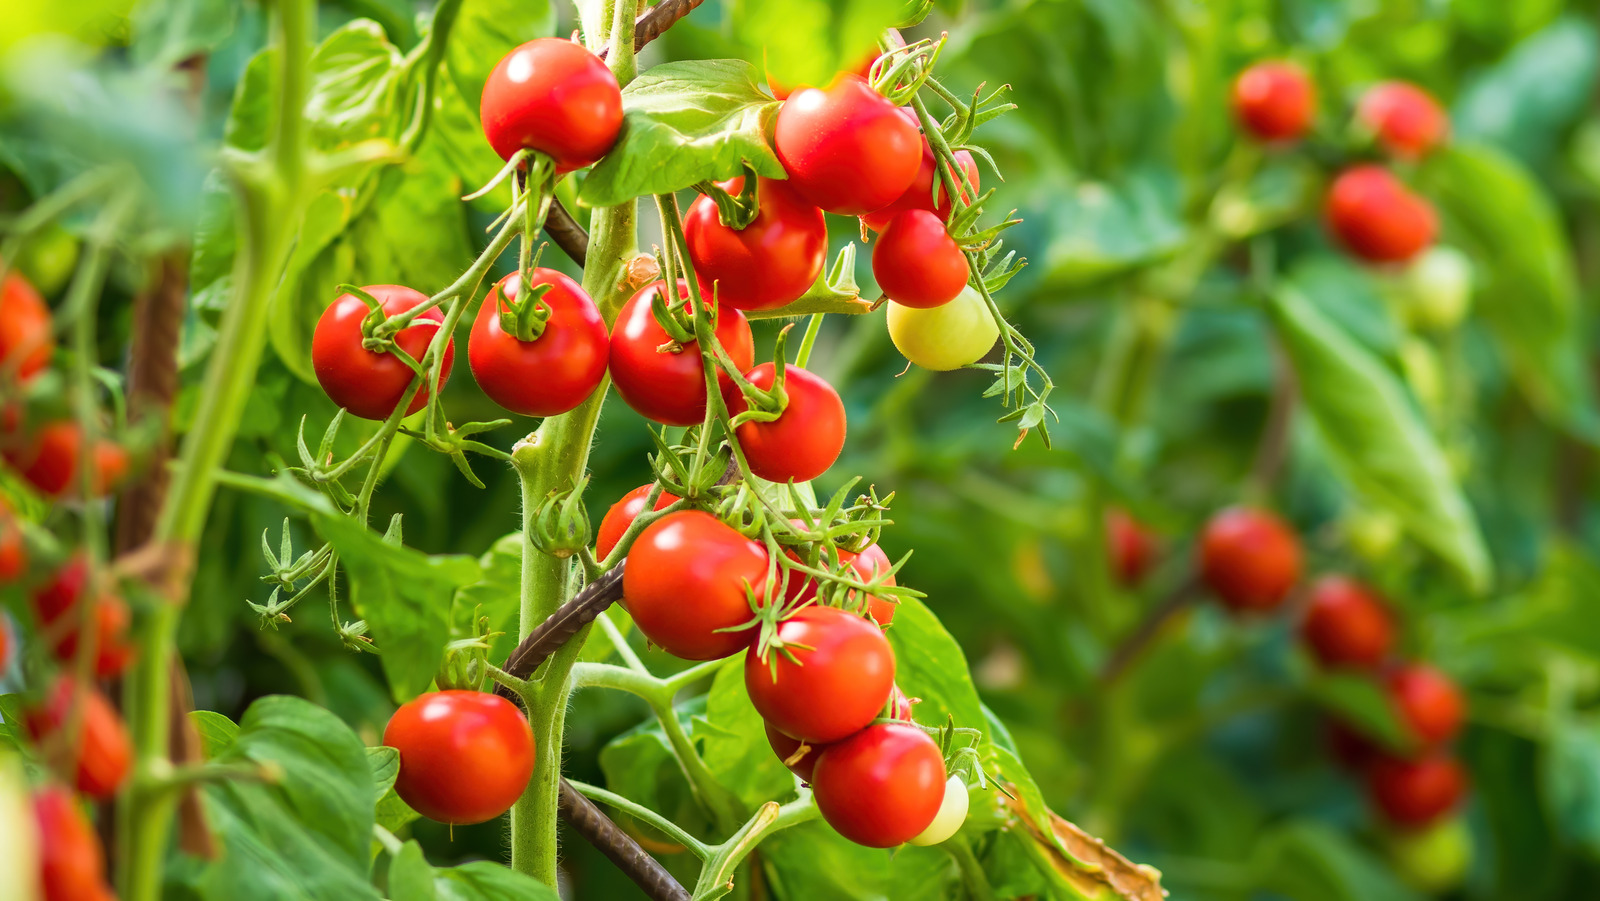 13 Plants You Won’t Want Too Close To Your Tomatoes This Year – House Digest